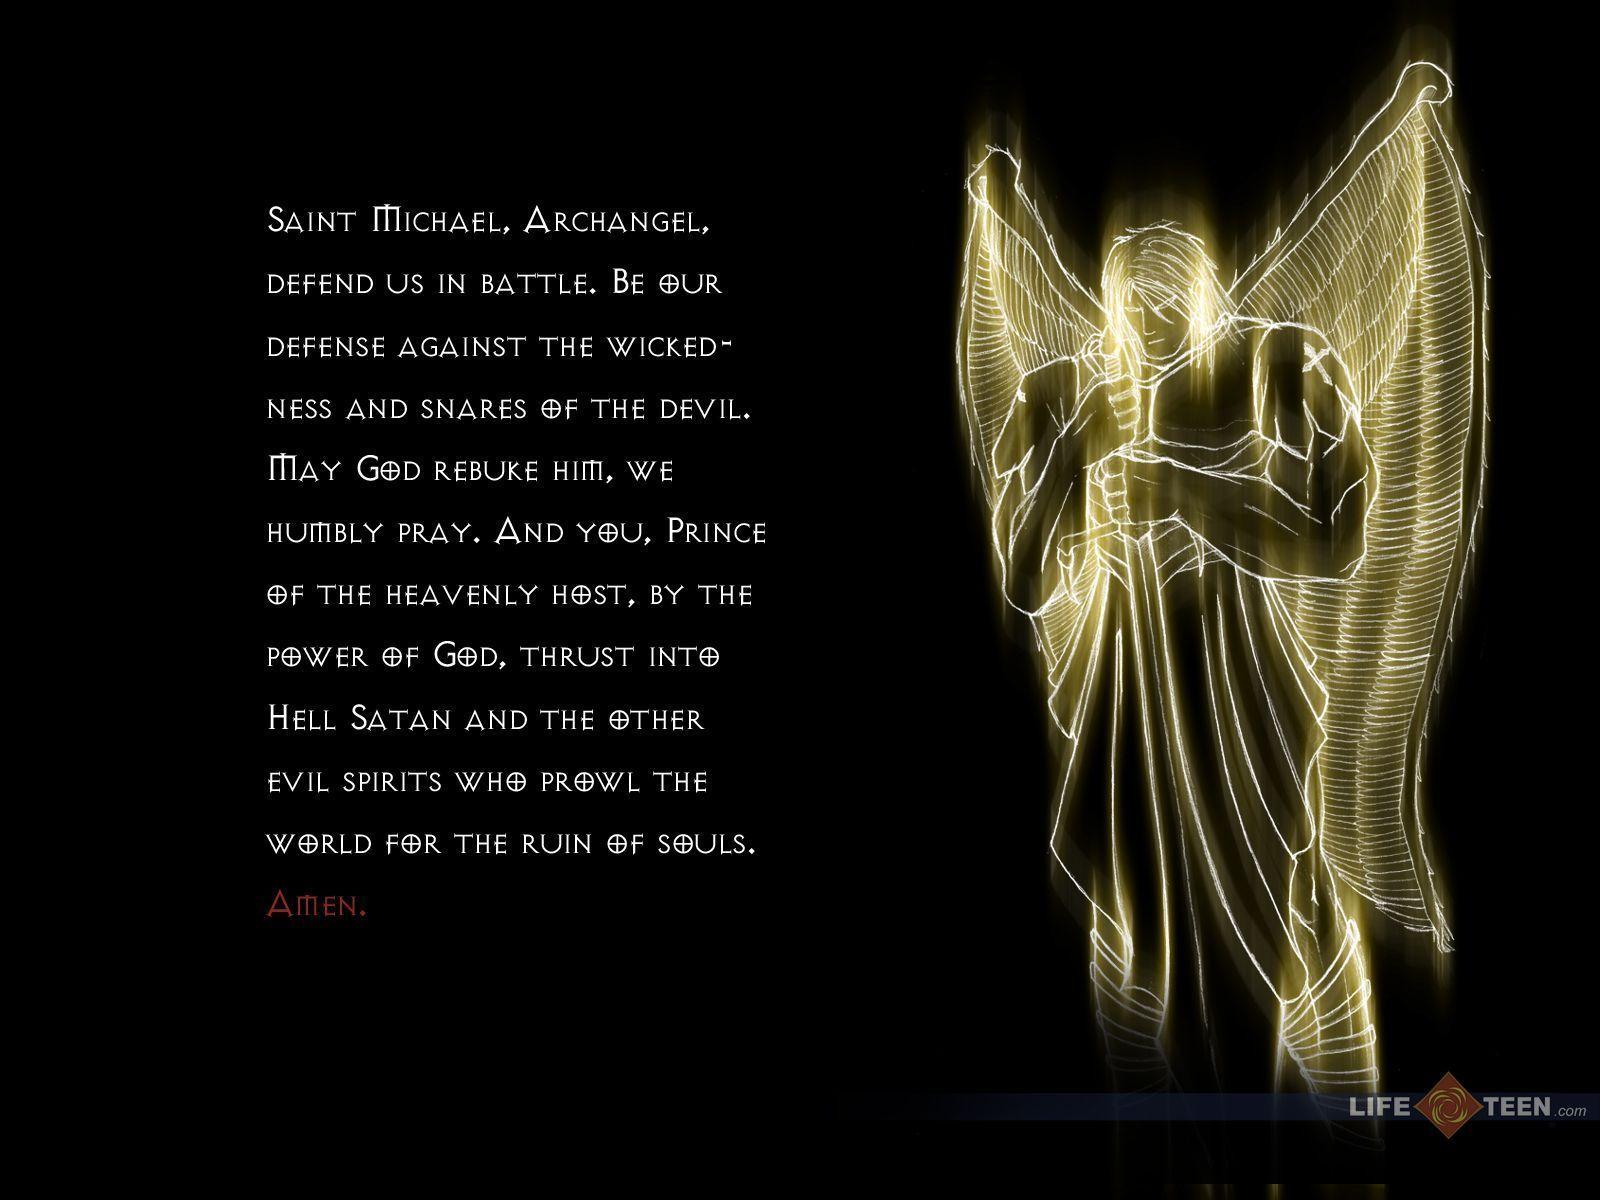 archangel michael Image Search Results. Spiritchick